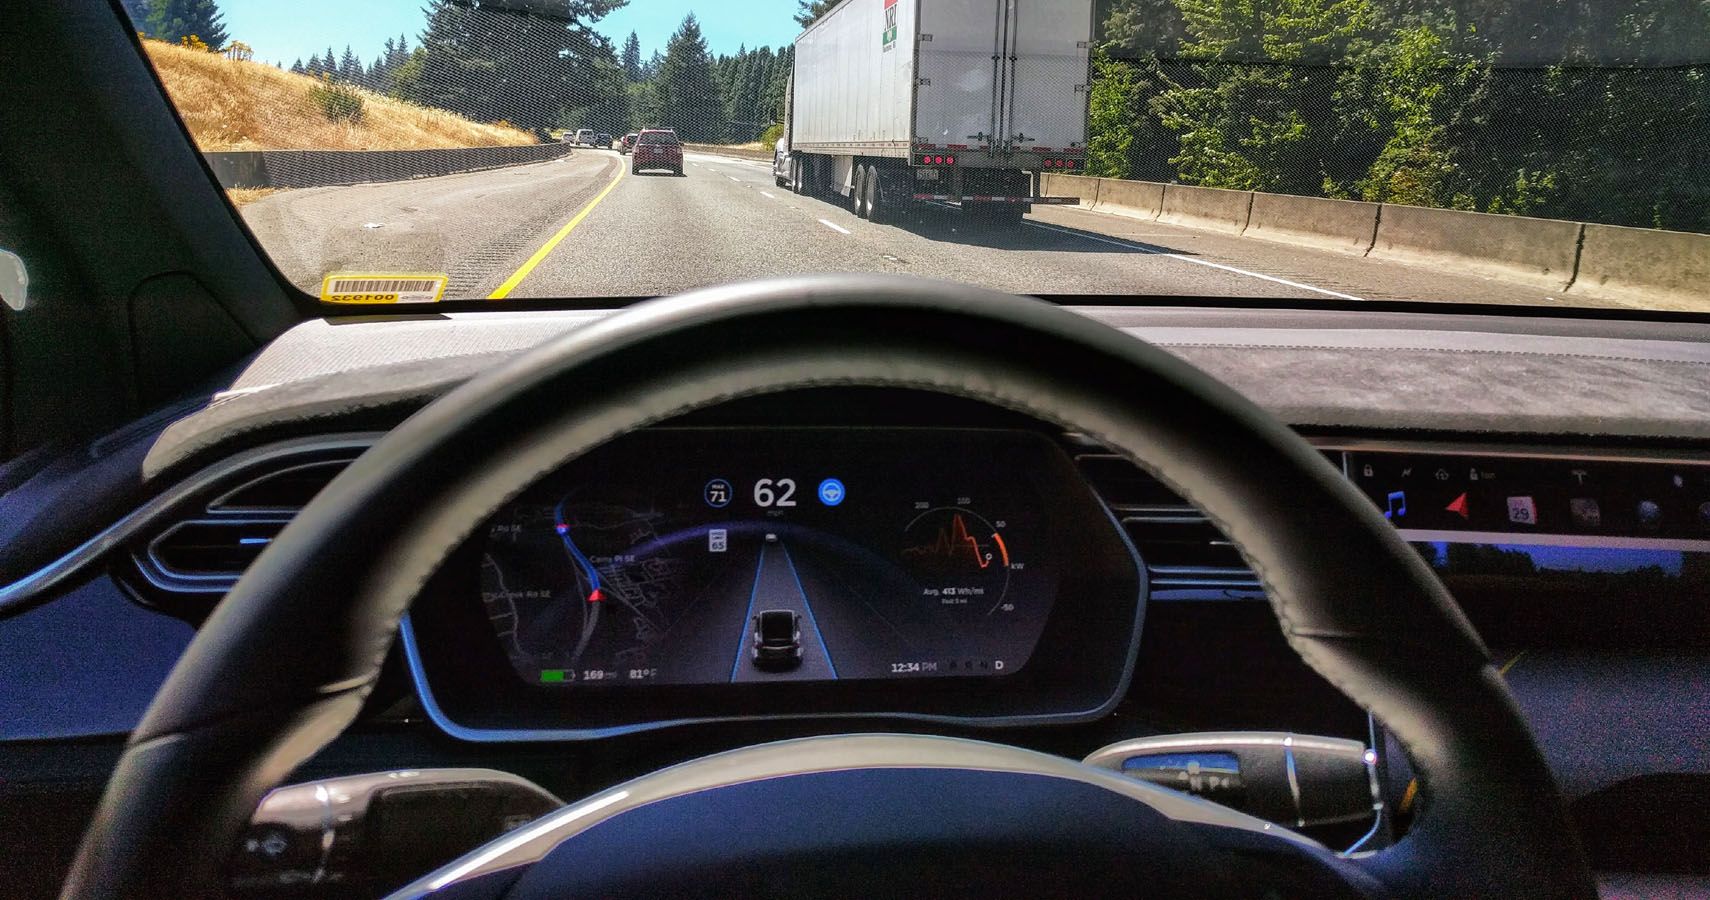 There’s A Whole Team Of “Jedi Engineers” Working On The Tesla’ Autopilot Dreams